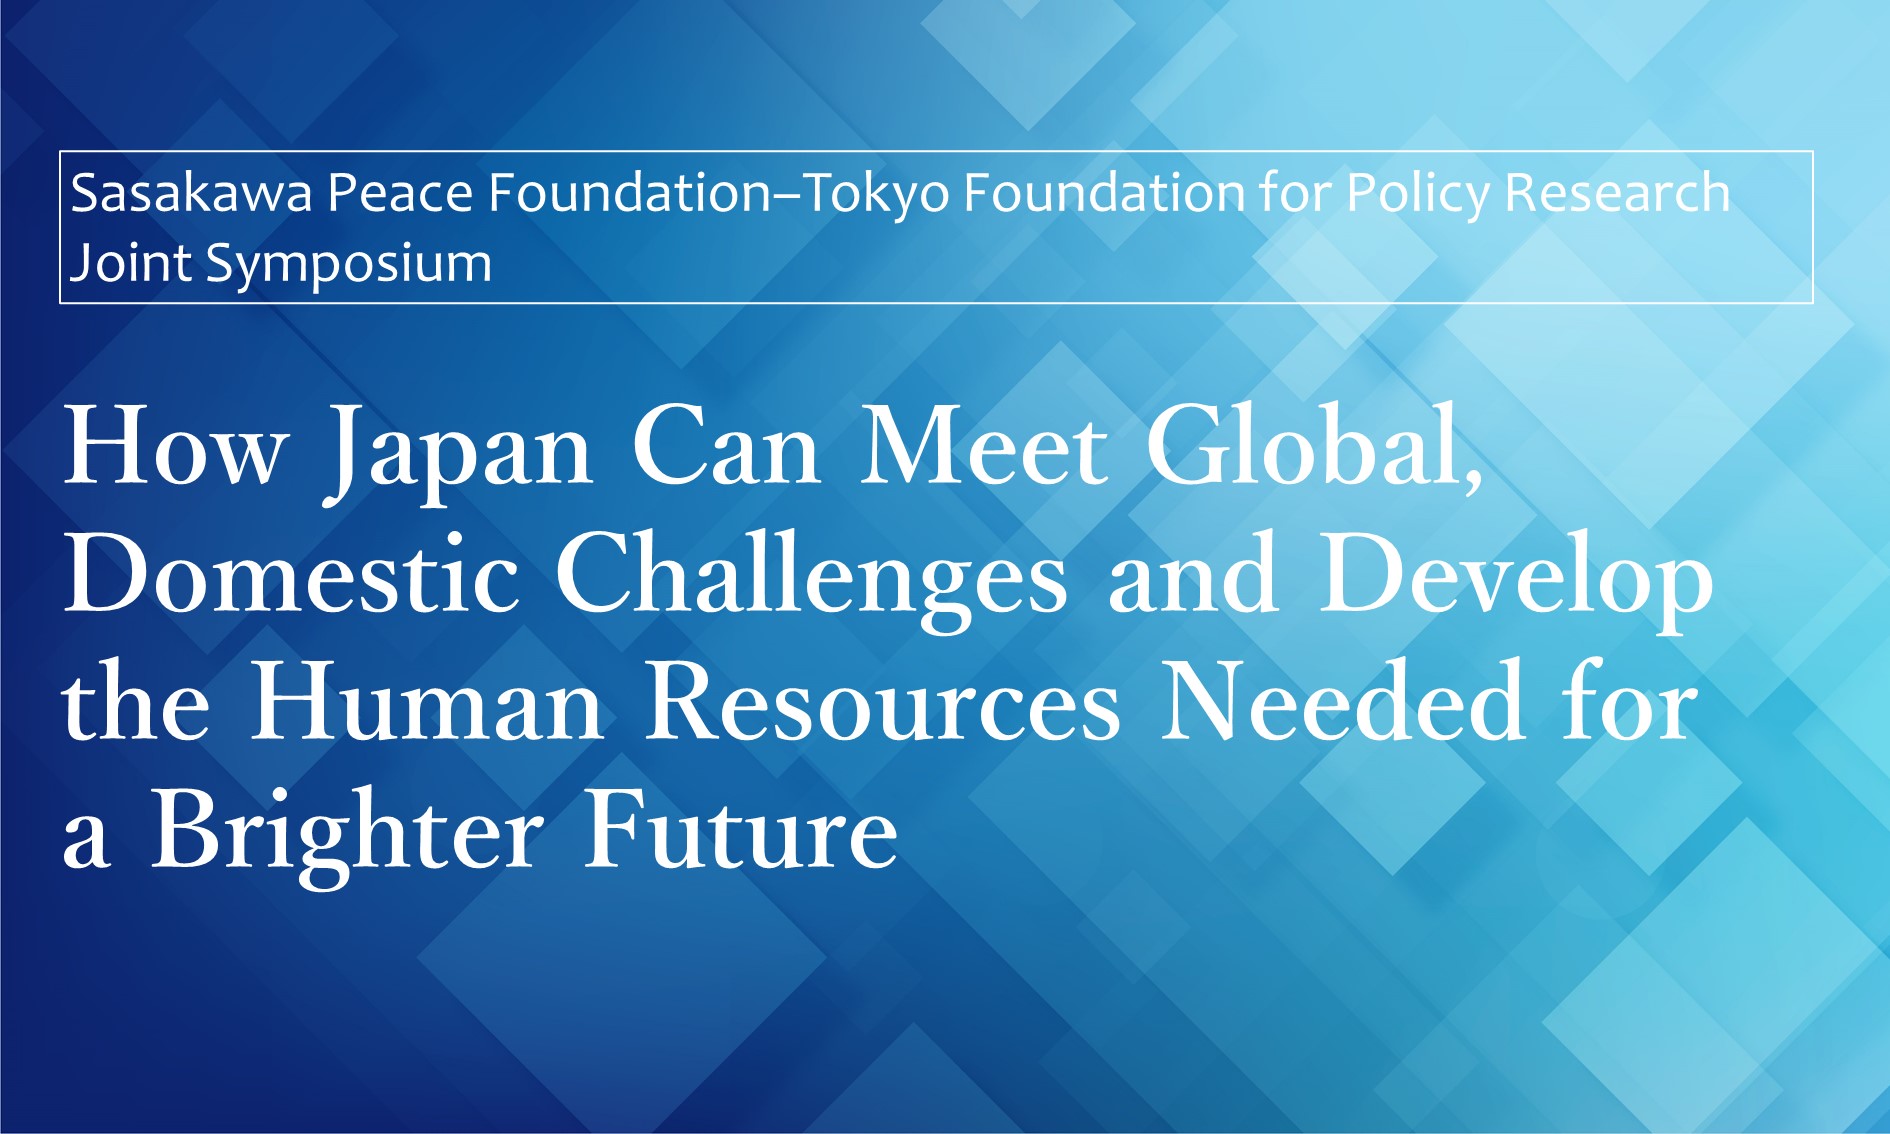 How Japan Can Meet Global, Domestic Challenges and Develop the Human Resources Needed for a Brighter Future: Sasakawa Peace Foundation–Tokyo Foundation for Policy Research Joint Symposium Report